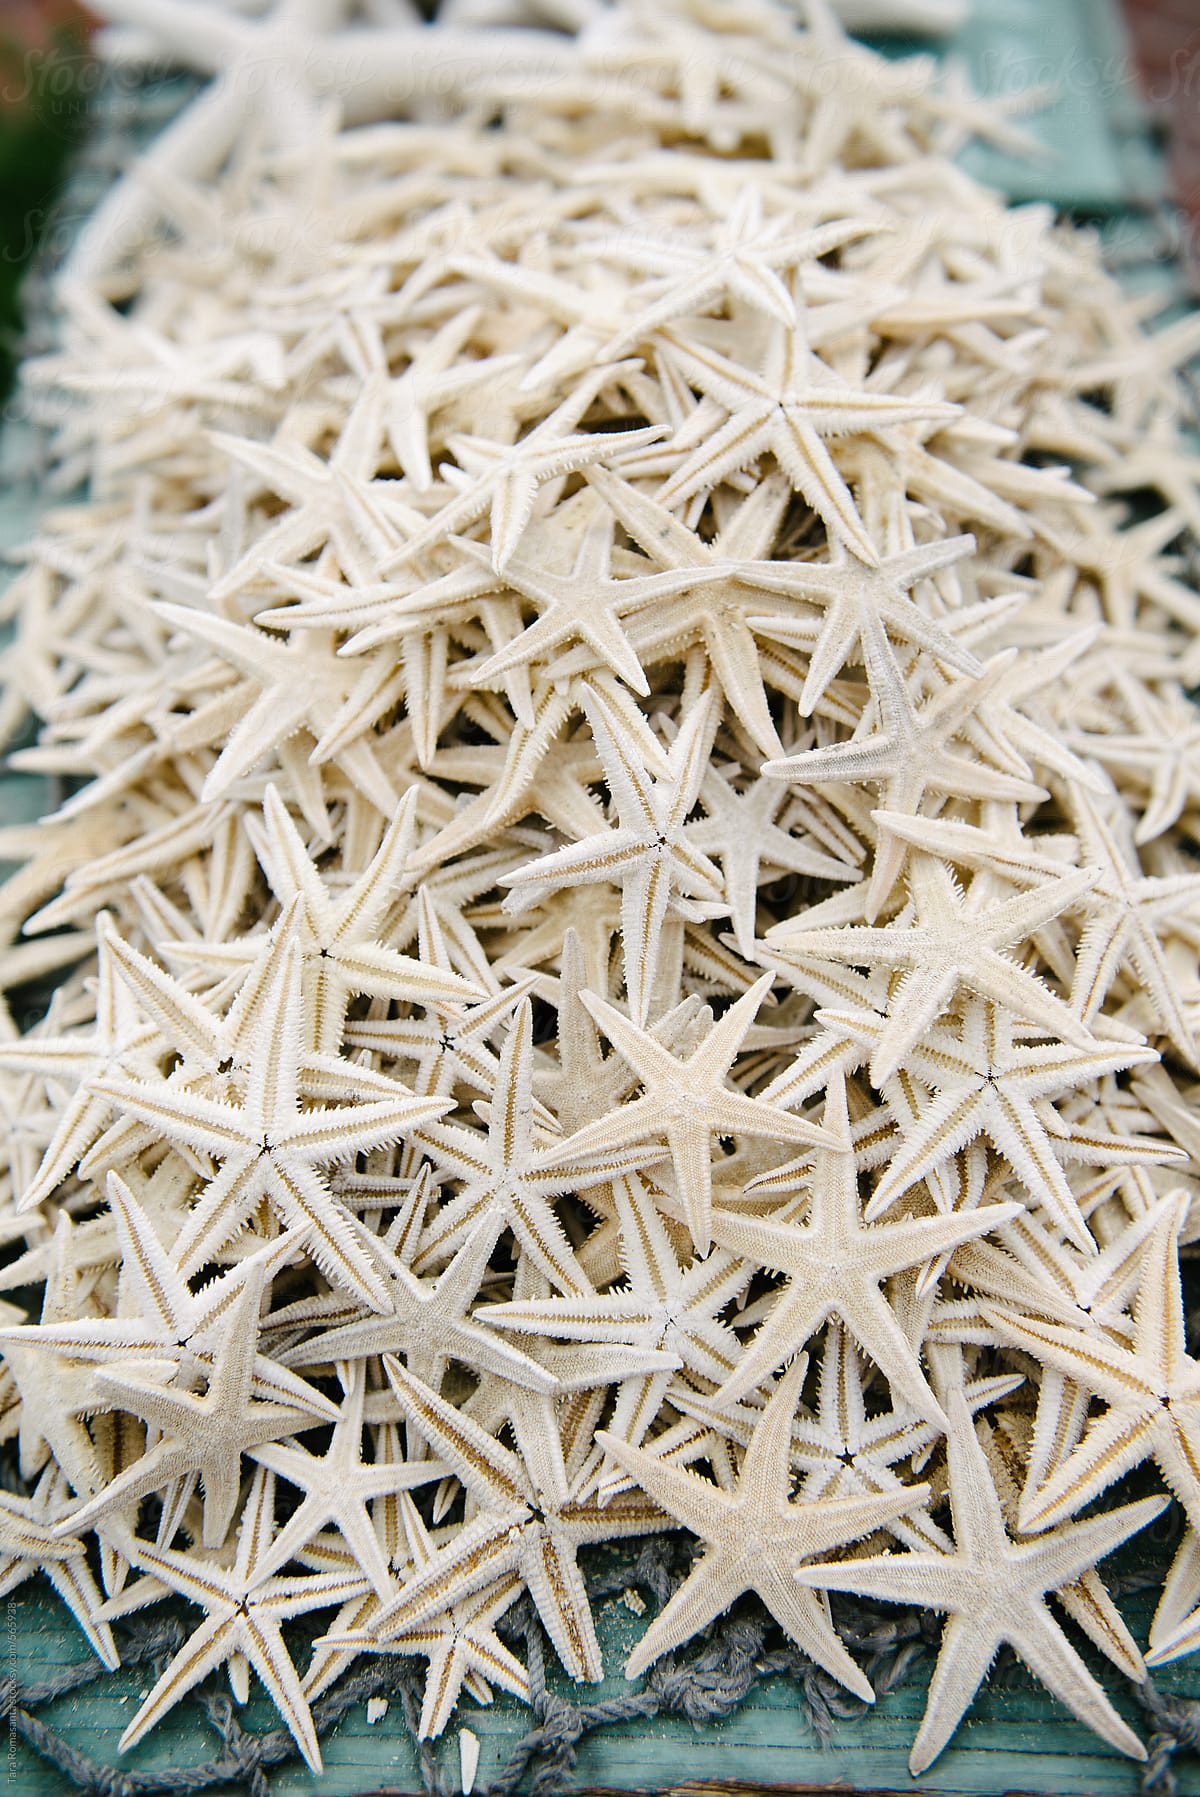 a large quantity of dried white star fish